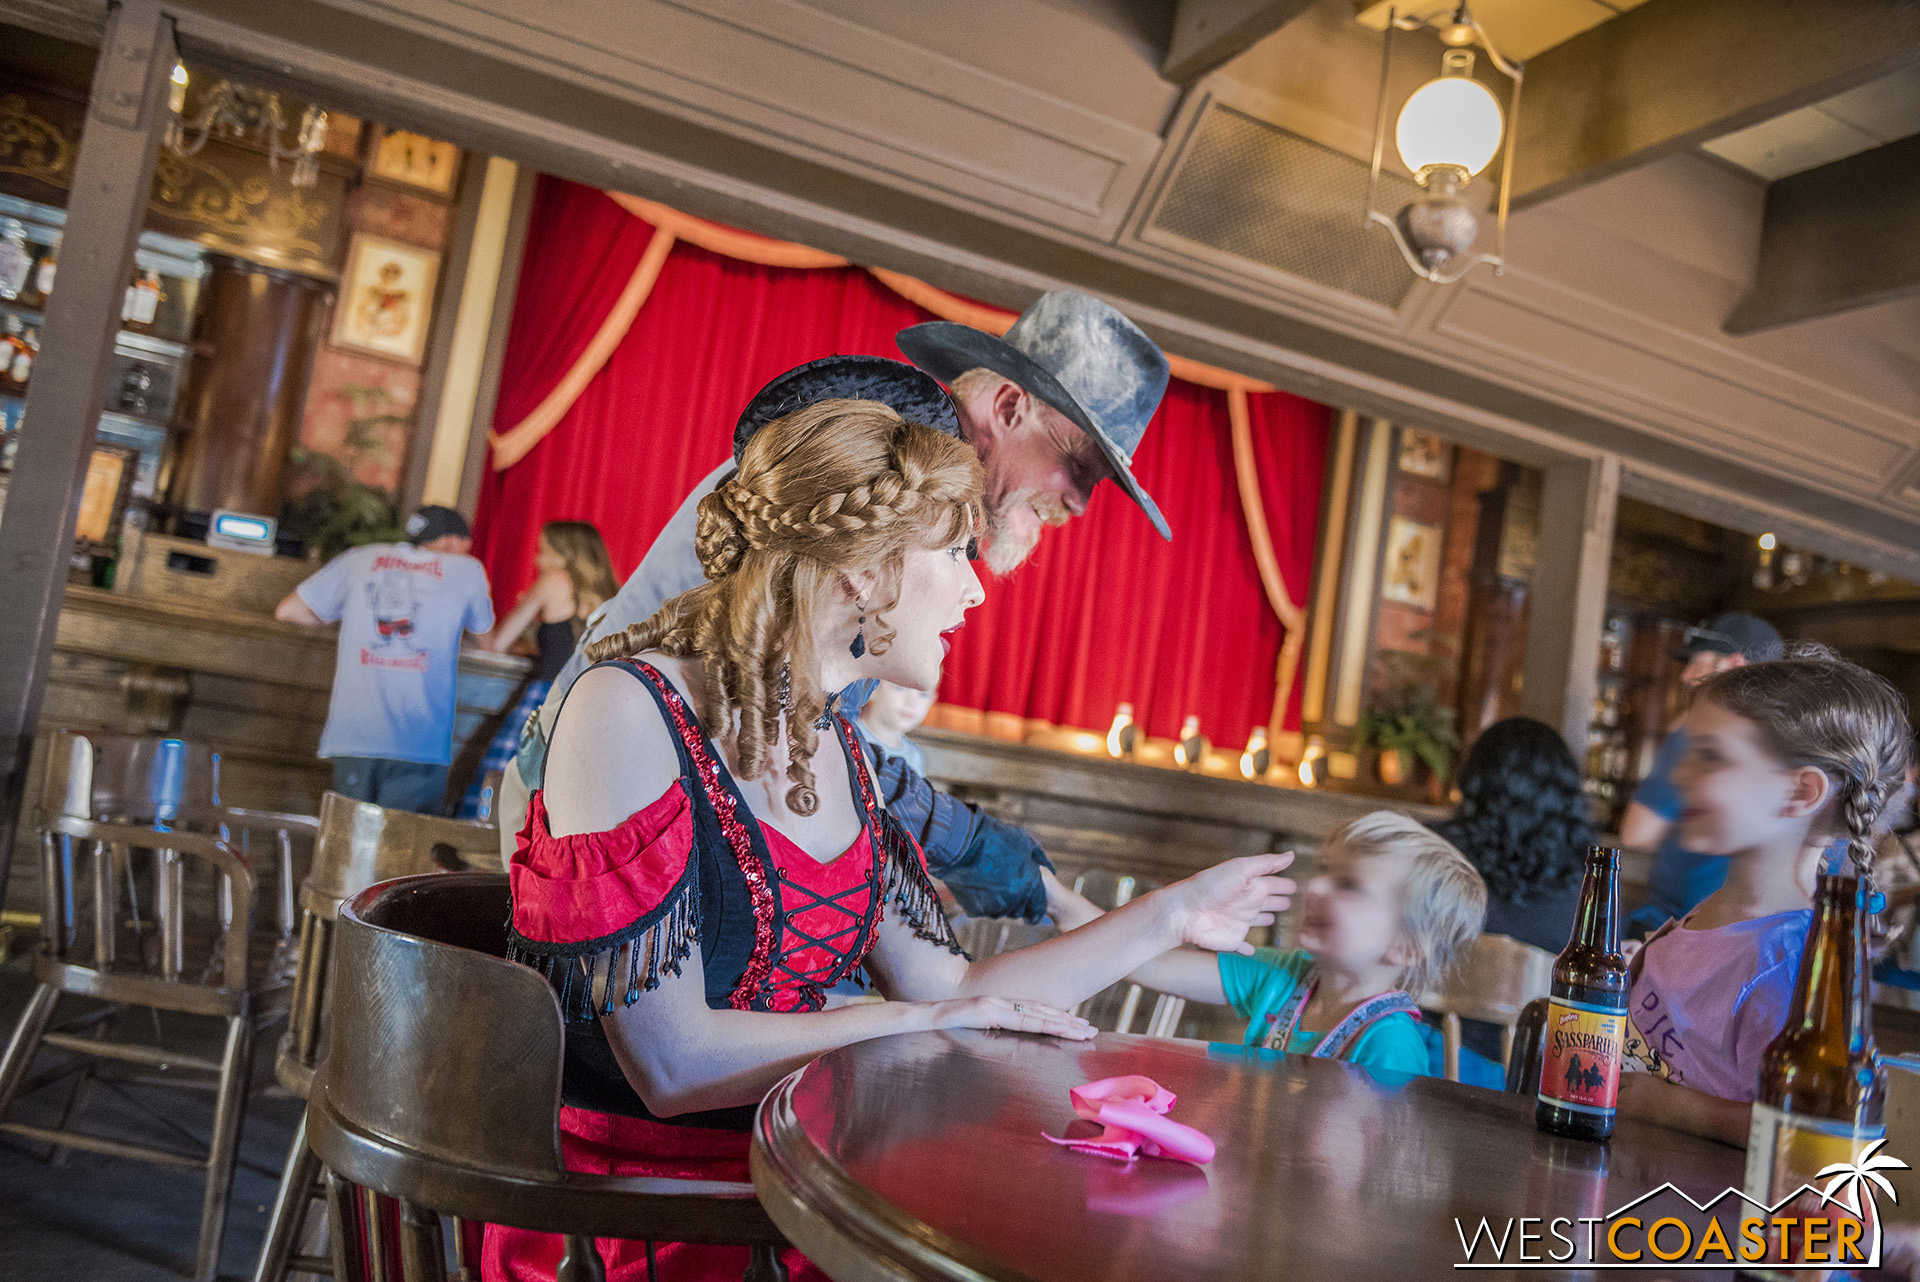  Violet Lee spends much of her time at the Calico Saloon these days. 